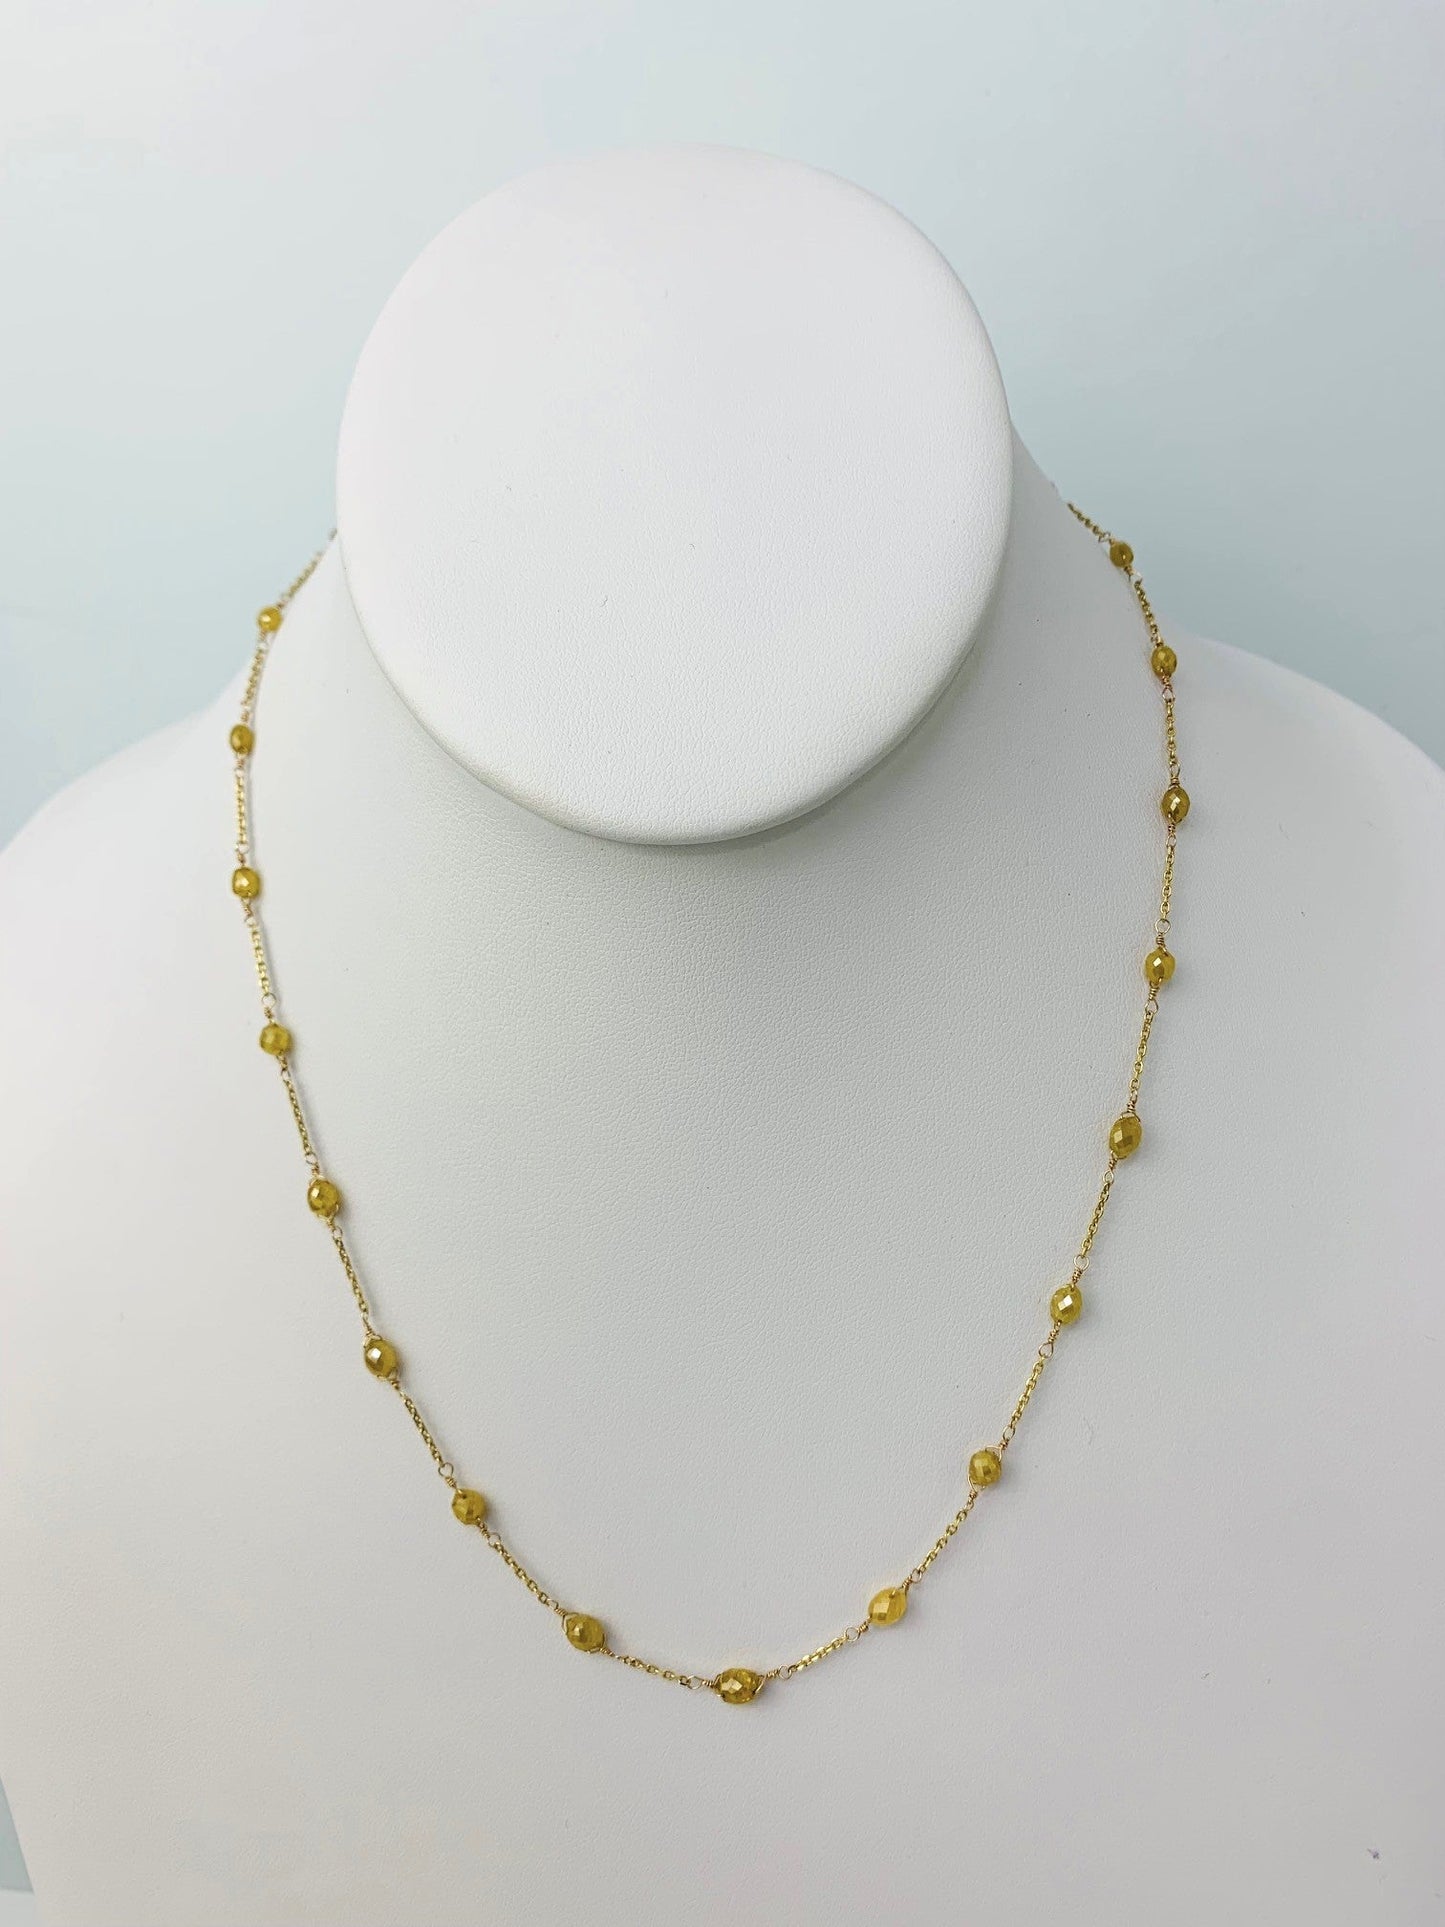 18" Yellow Diamond Station Necklace in 18KY - NCK-277-TNCDIA18Y-YL-18 6.3ctw